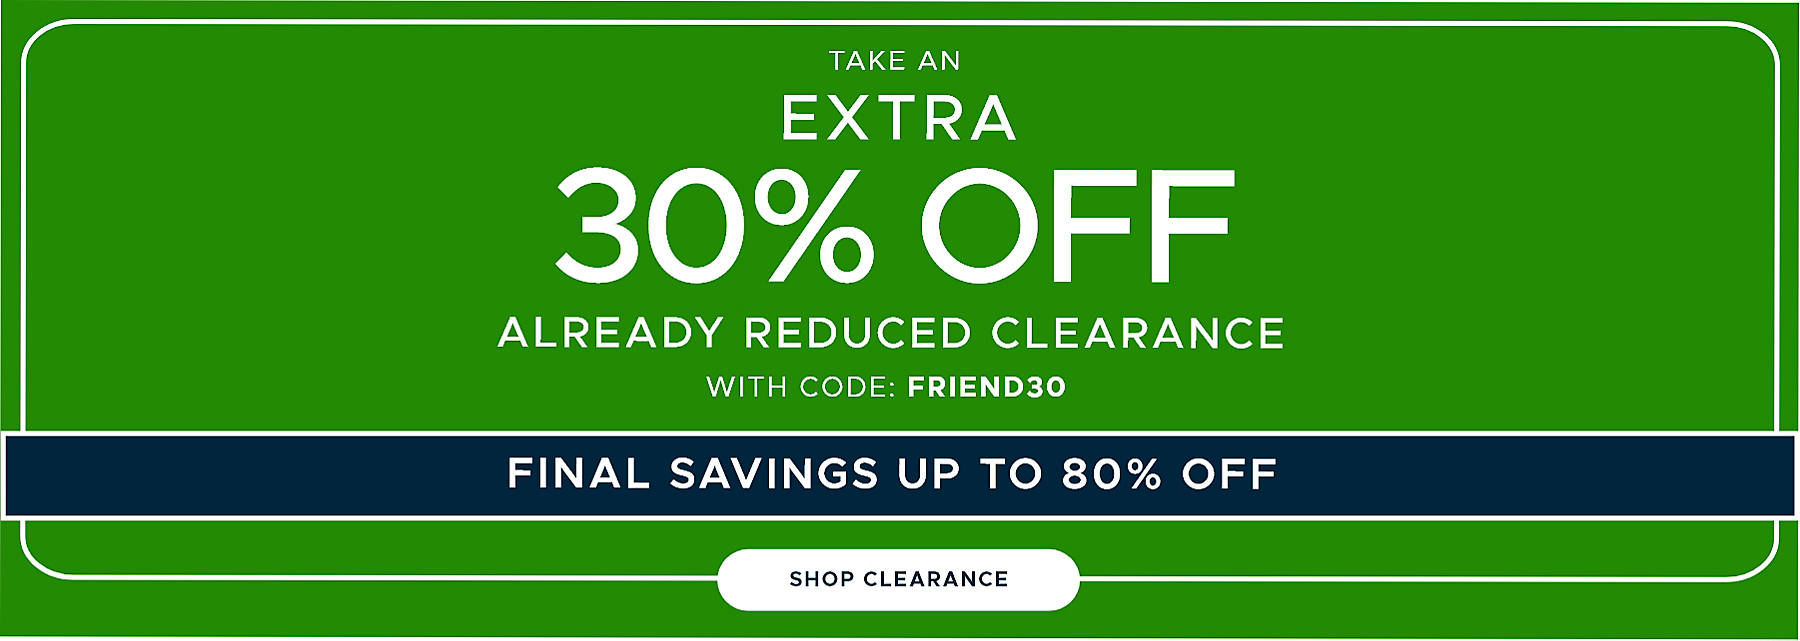 Take an Extra 30% off Already Reduced Clearance with code: FRIEND30 Final Savings up to 80% off Shop Clearance